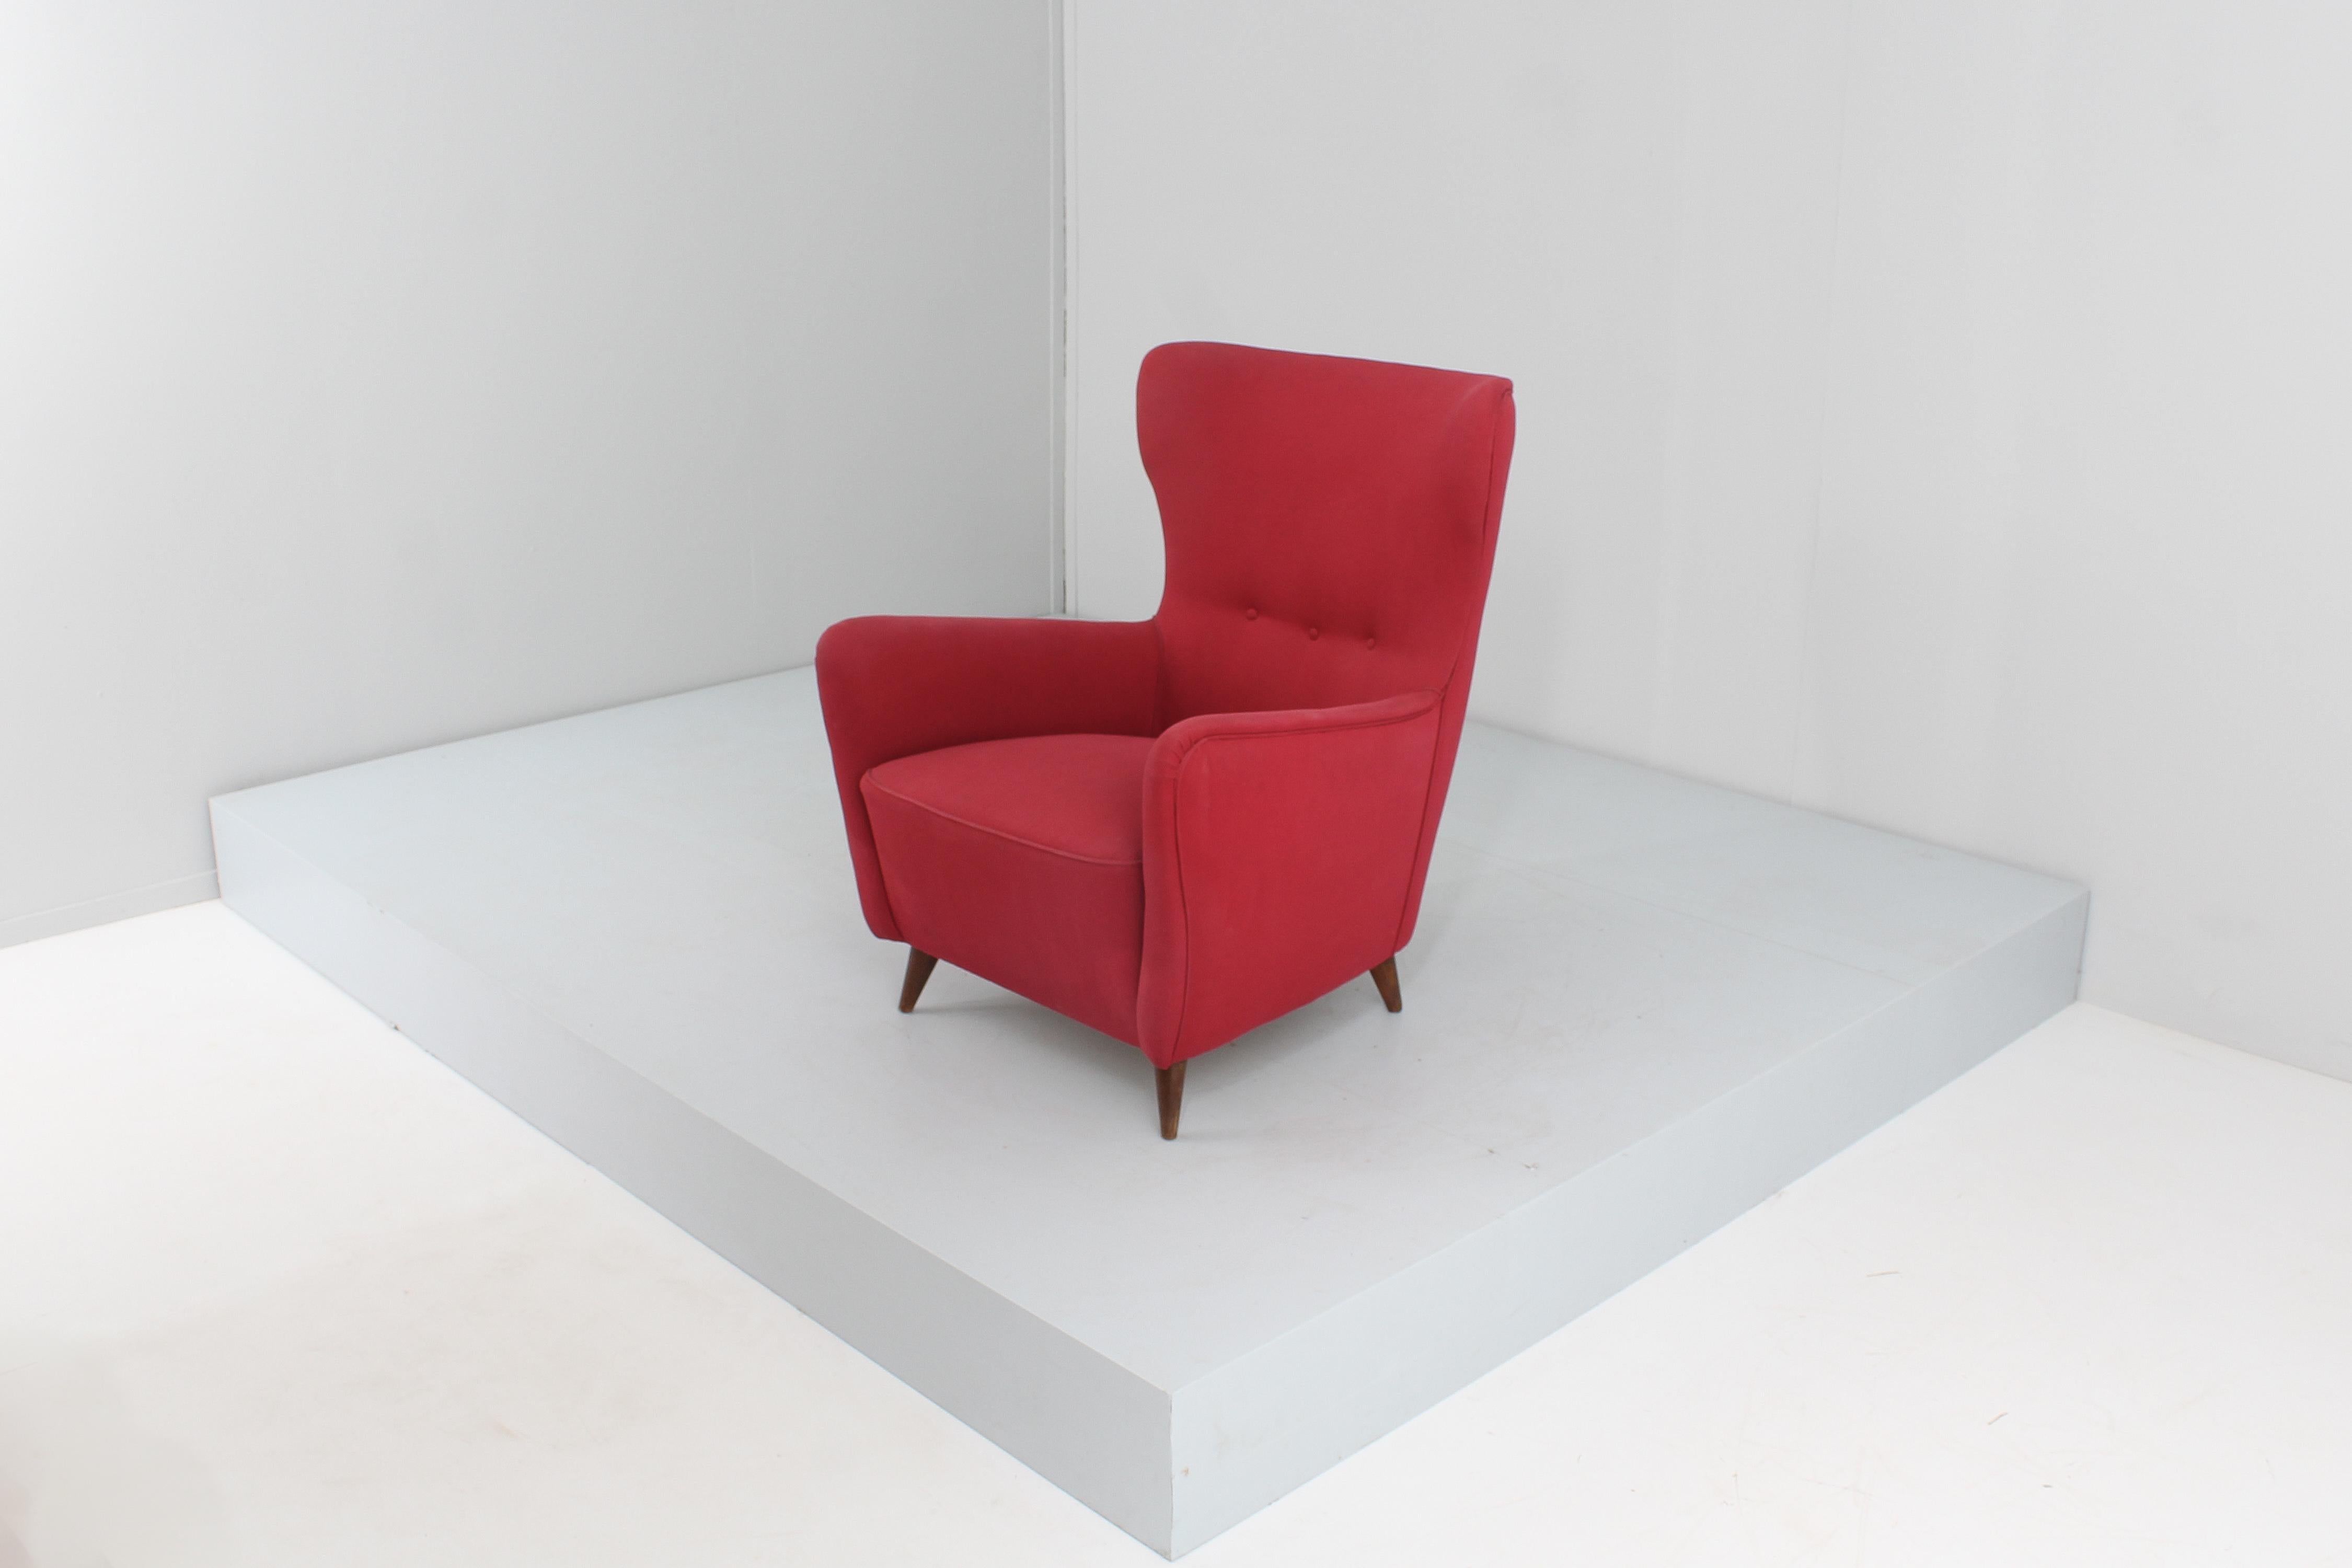 Midcentury Giò Ponti Style Wood and Red Fabric Armchair, circa 1950s Italy  For Sale 4